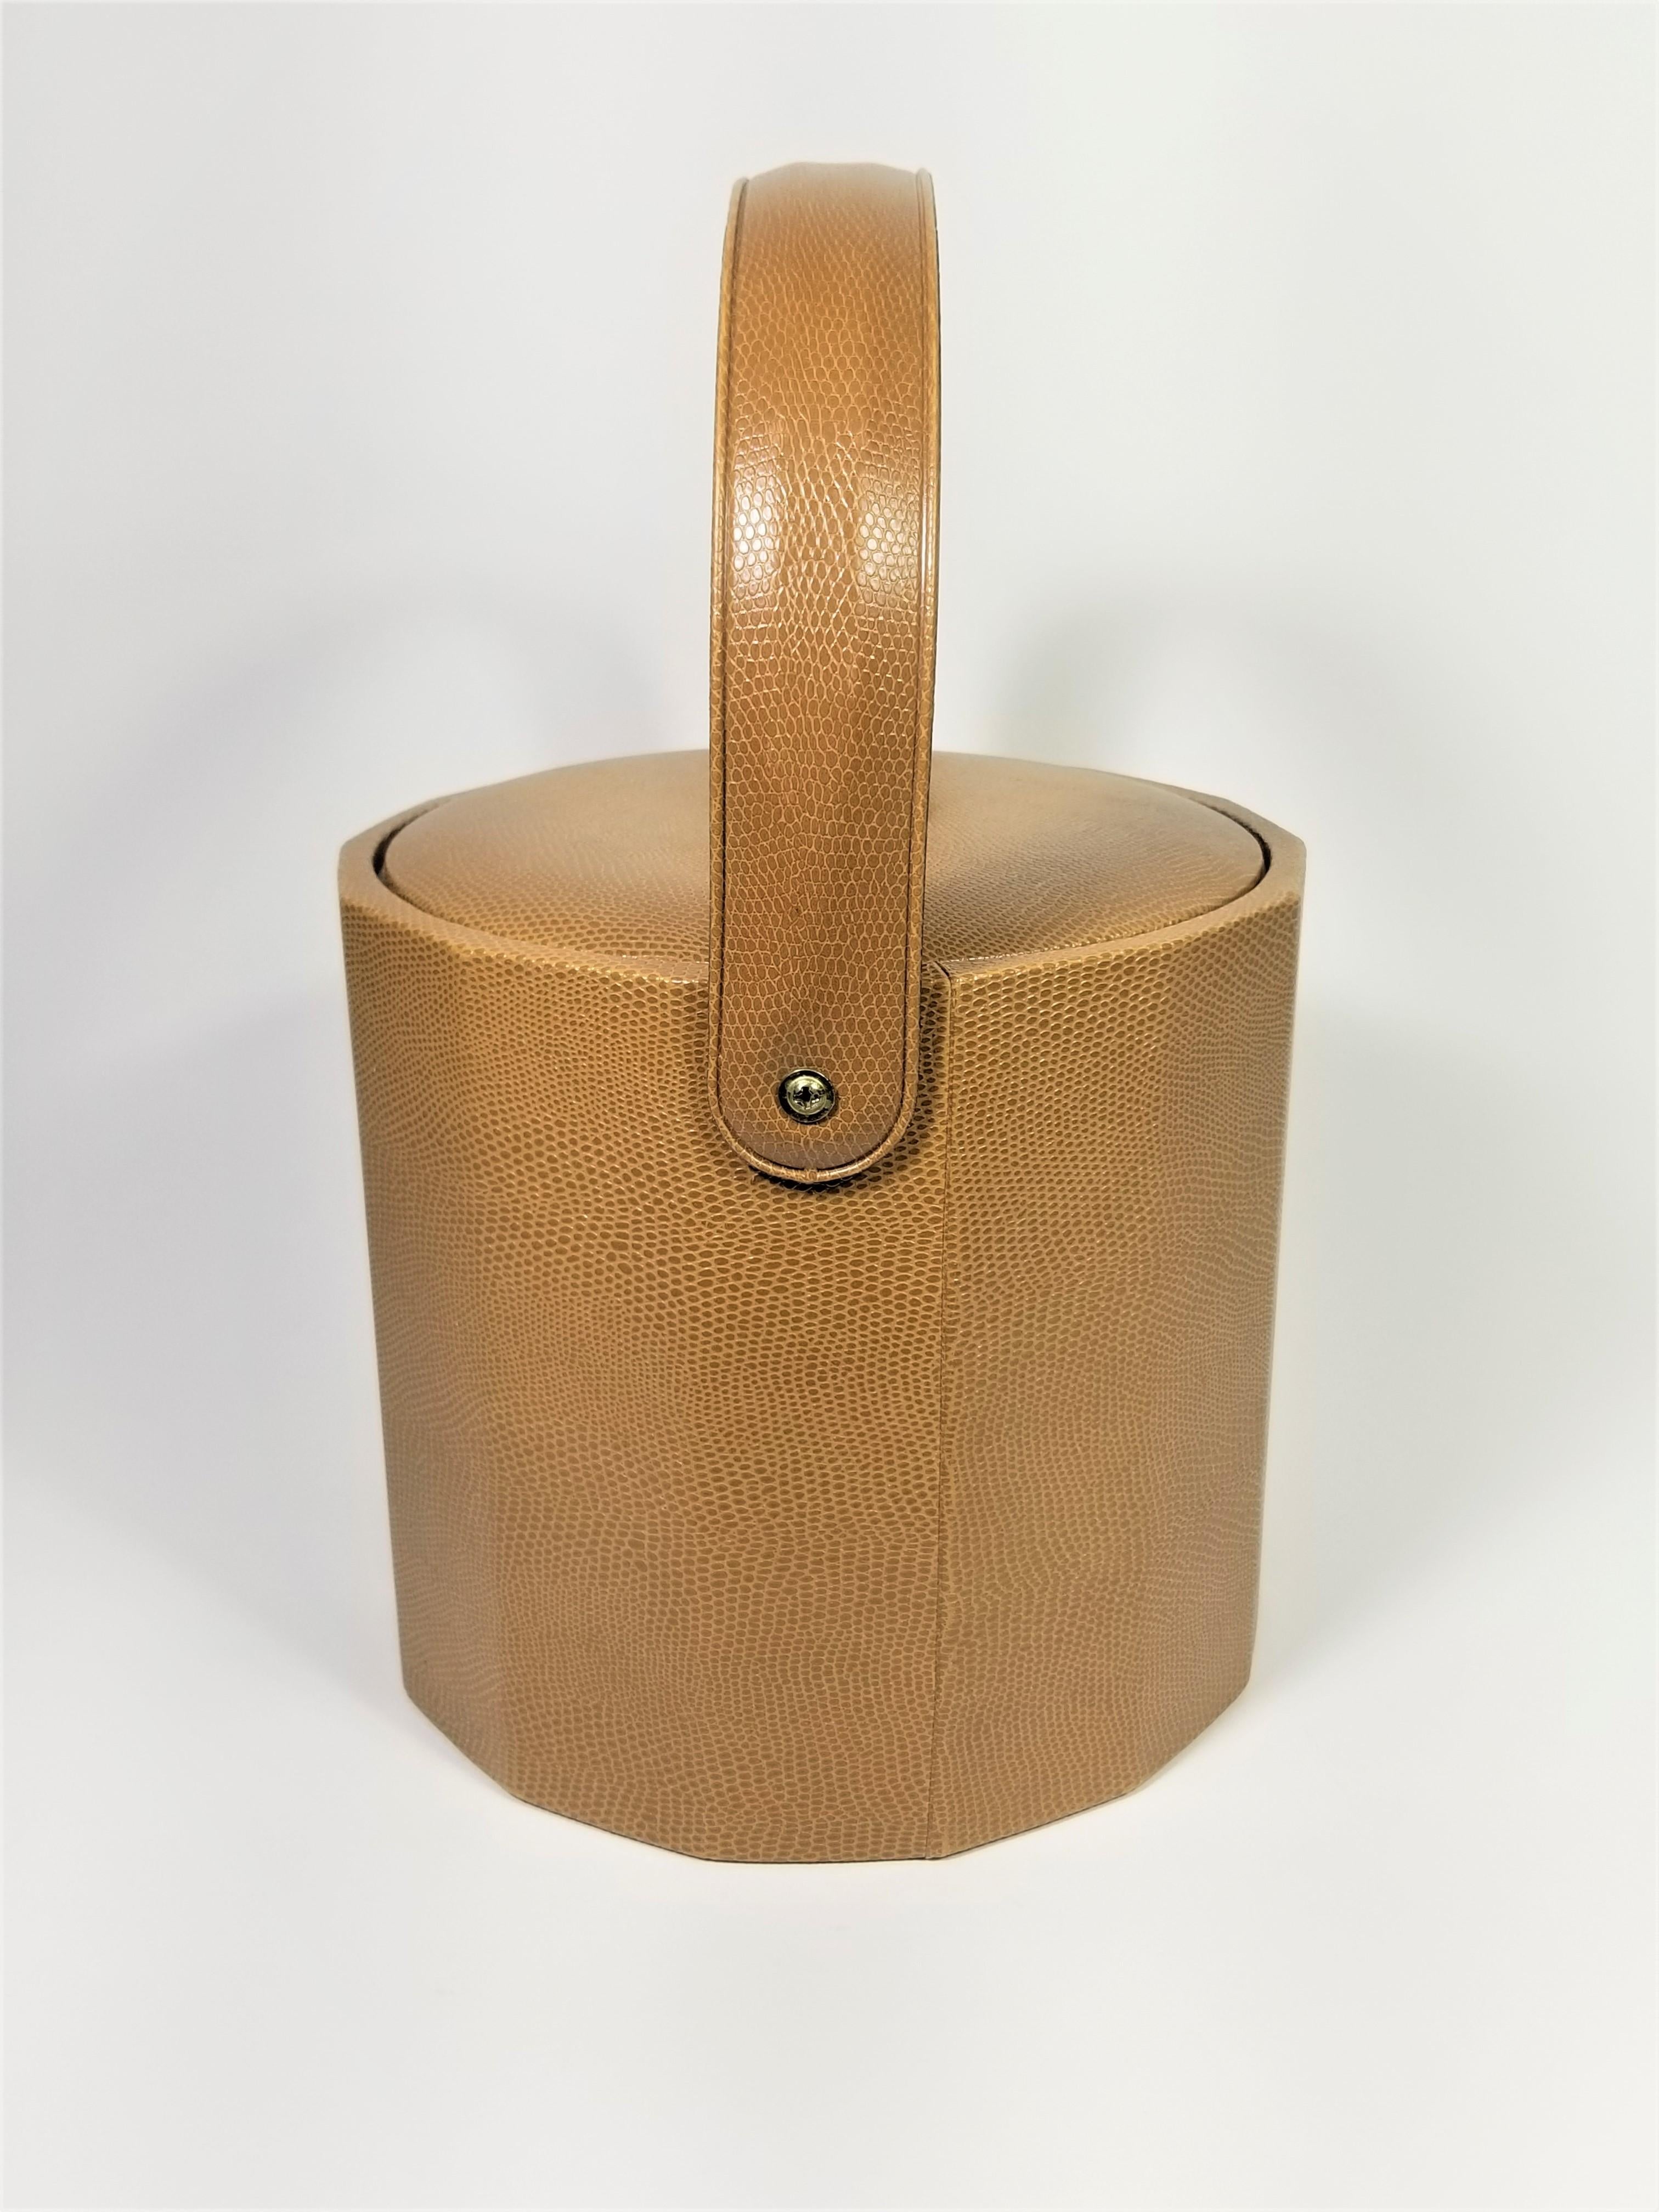 1960s Mid Century Georges Briard Ice Bucket. Carmel color textured faux leather with unpolished brass handle on lid. Signed on bottom. Very good condition. 

Height with handle up: 12.0 inches
Diameter with handle up: 9.0 inches

Height with handle